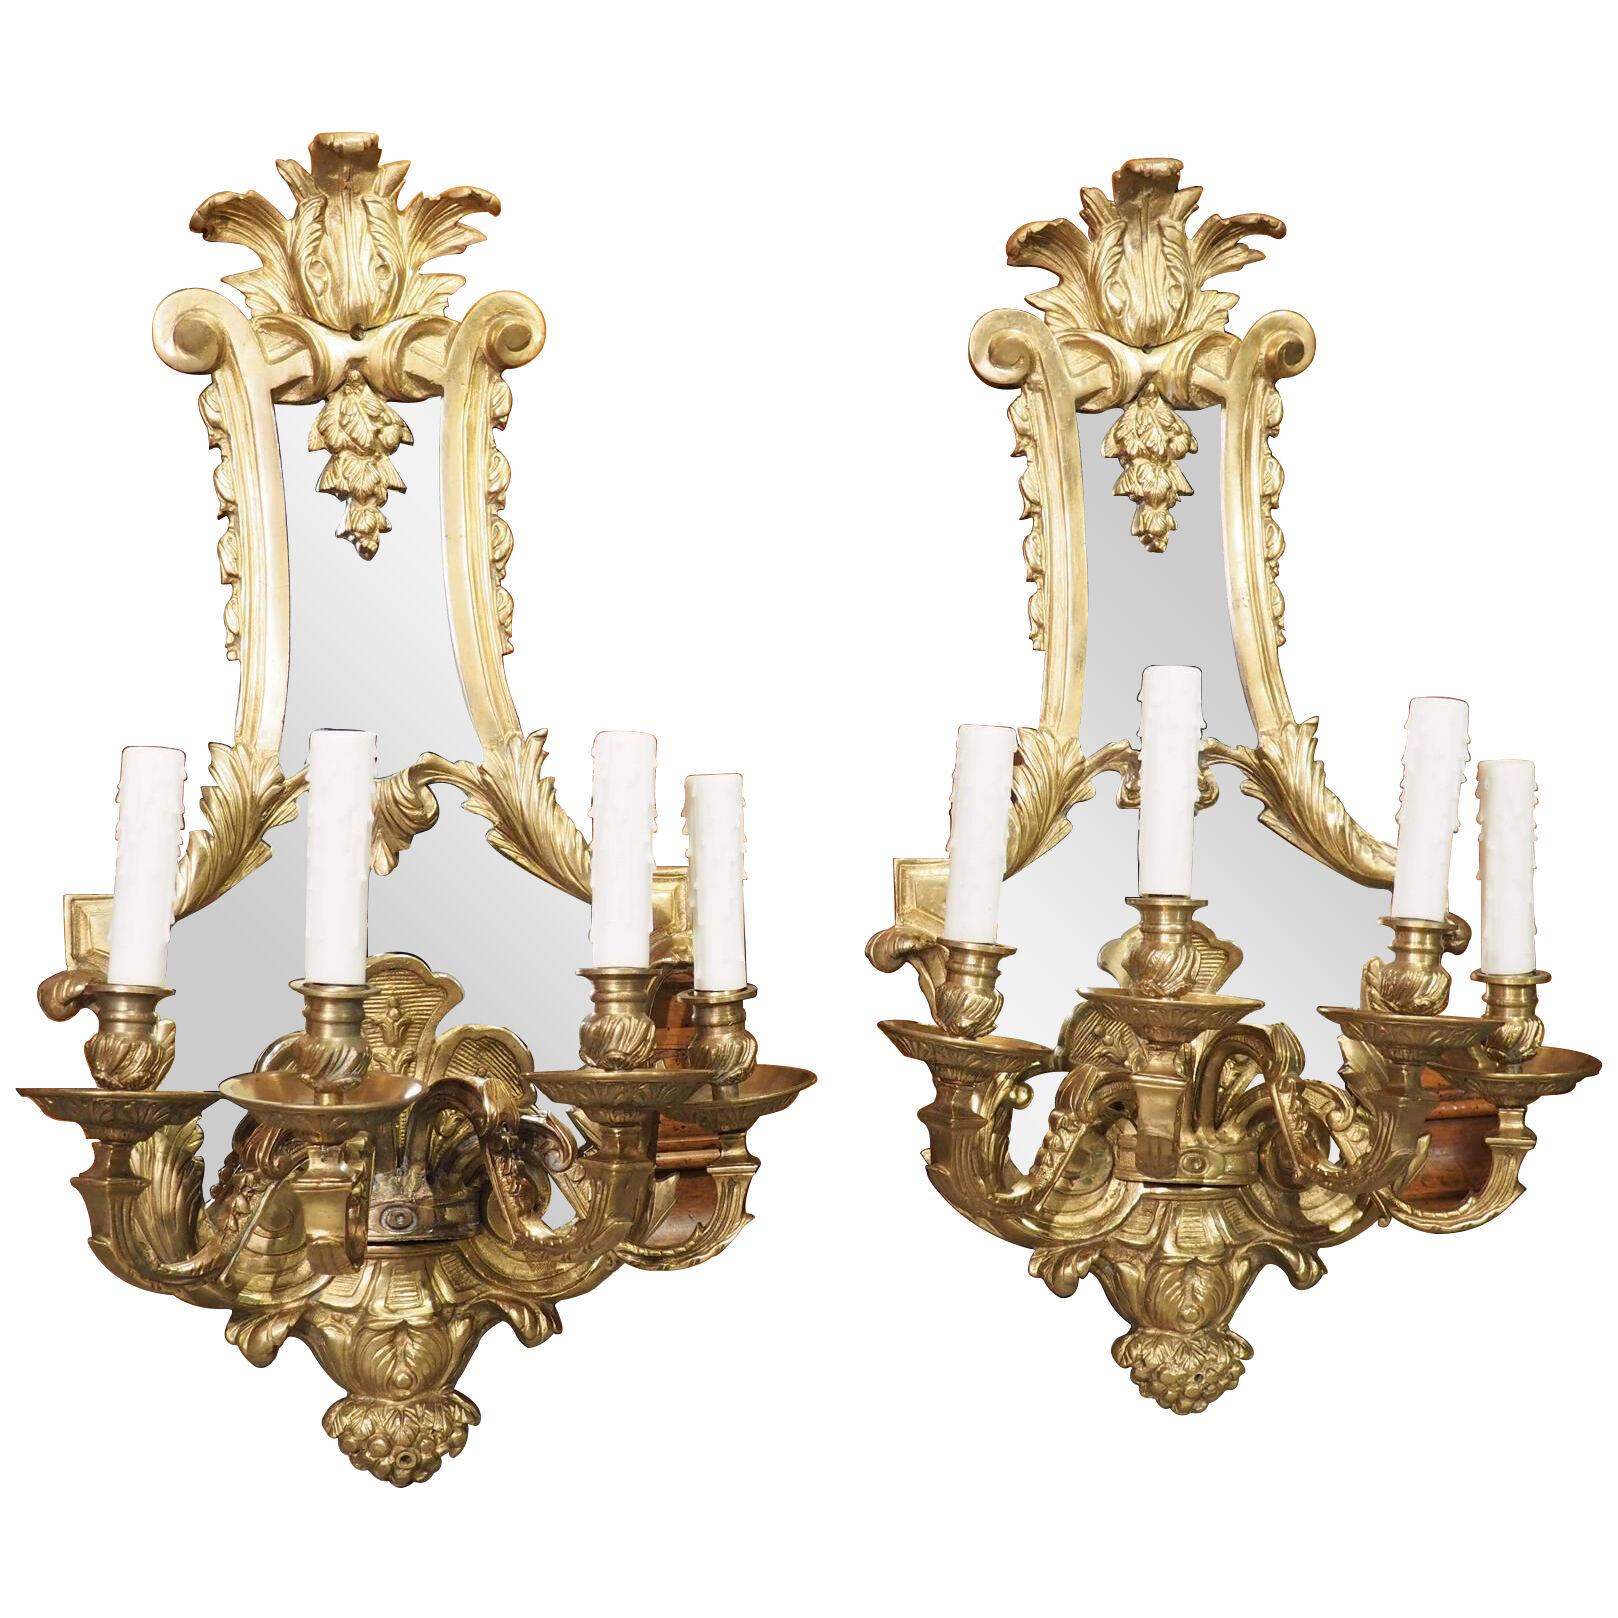 Pair of 19th Century Mirrored French Bronze Dore Wall Sconces